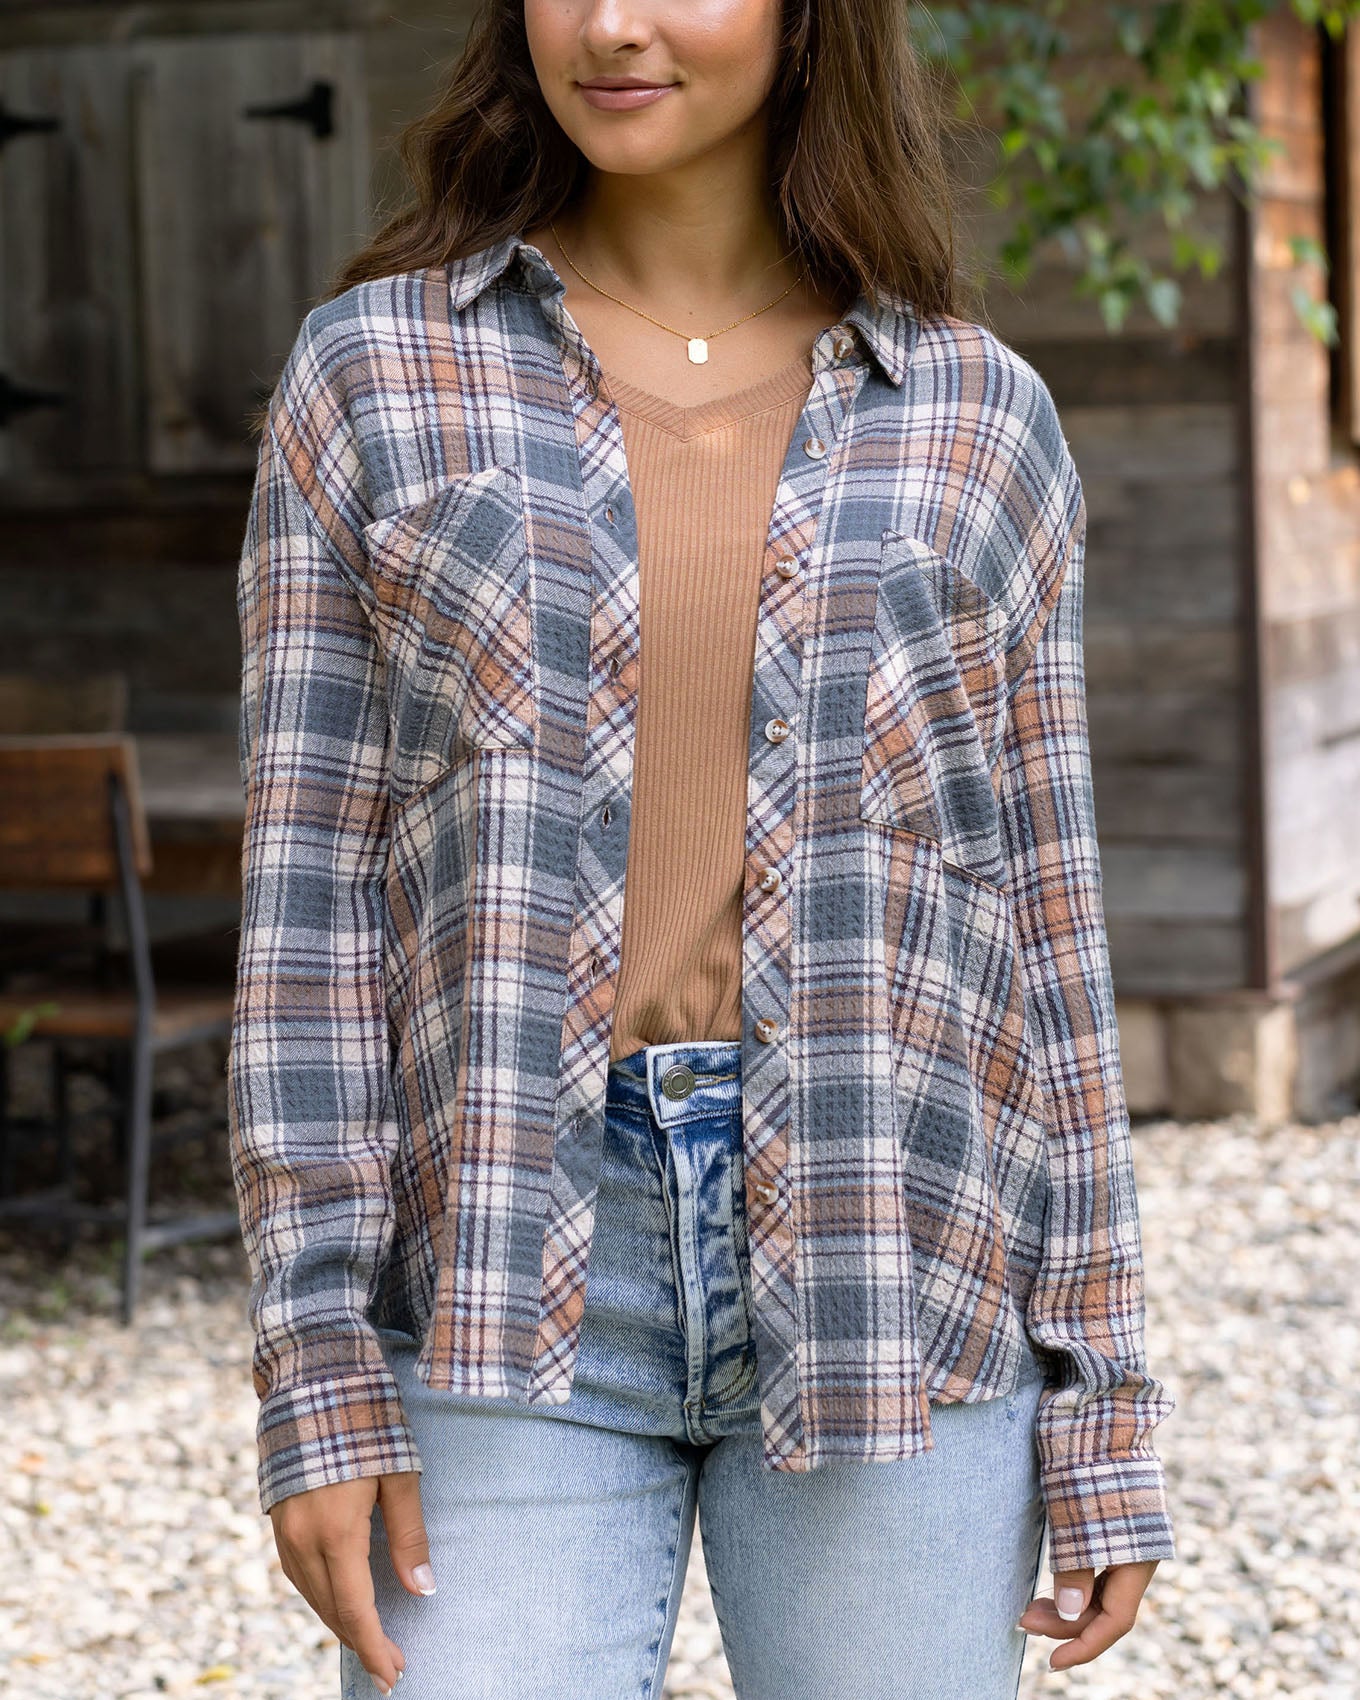 How to Wear a Flannel & Some Favorites